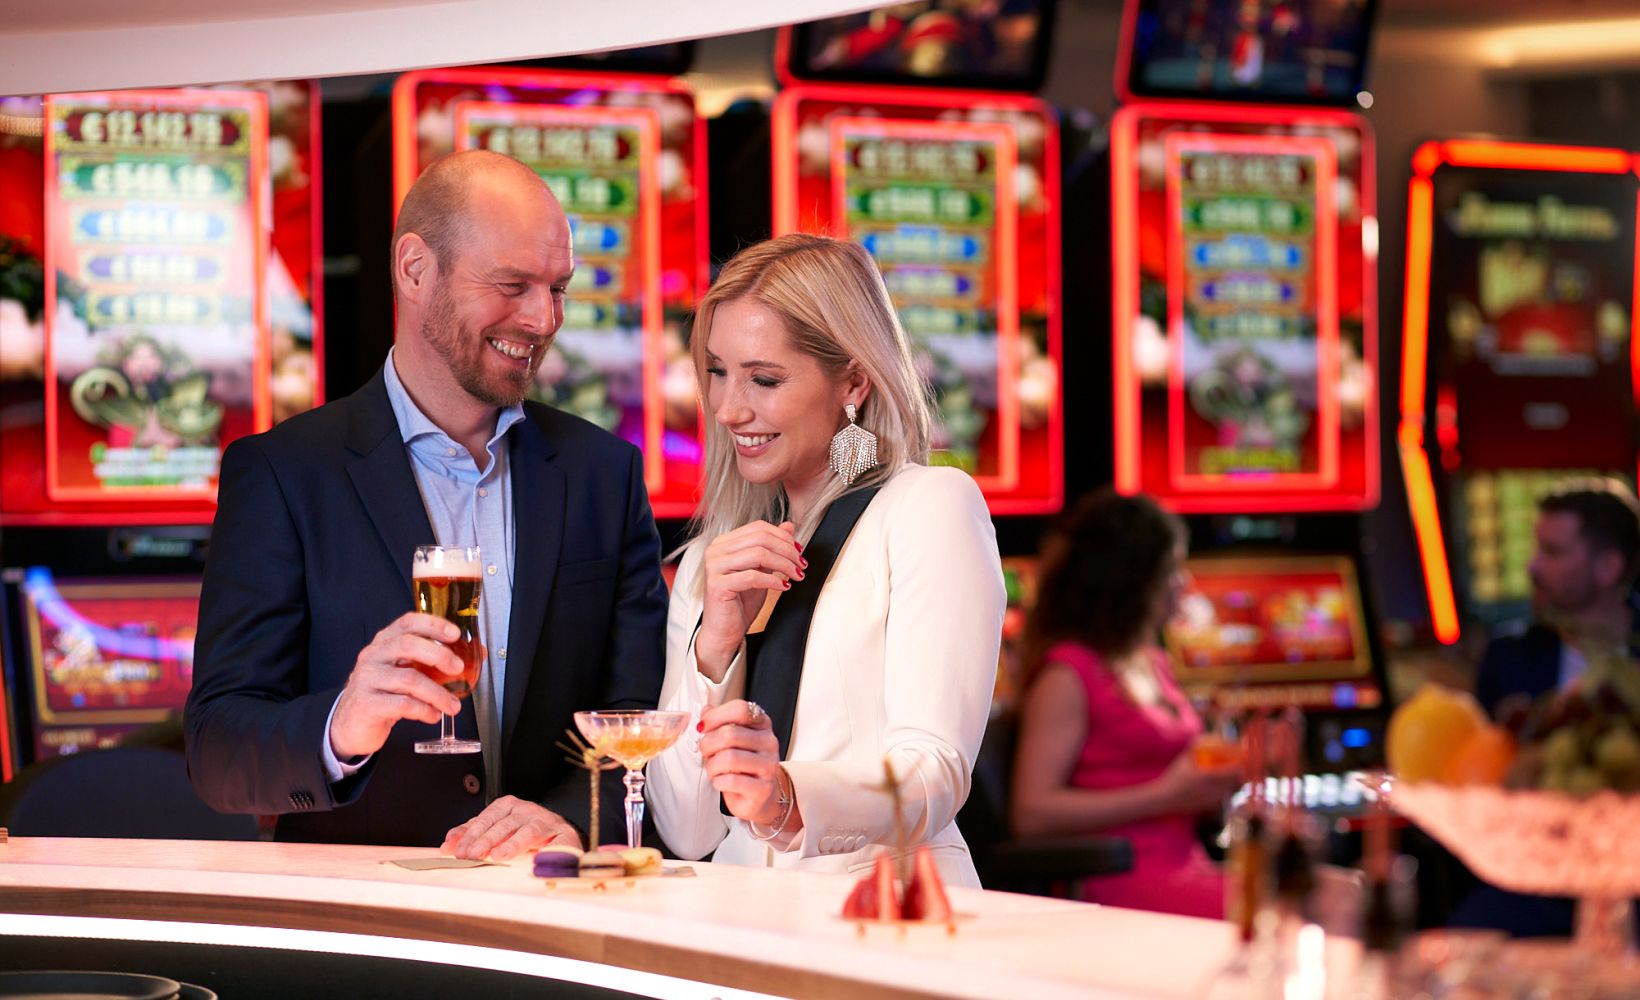 A man talks to a woman at the bar in the Leipzig casino.